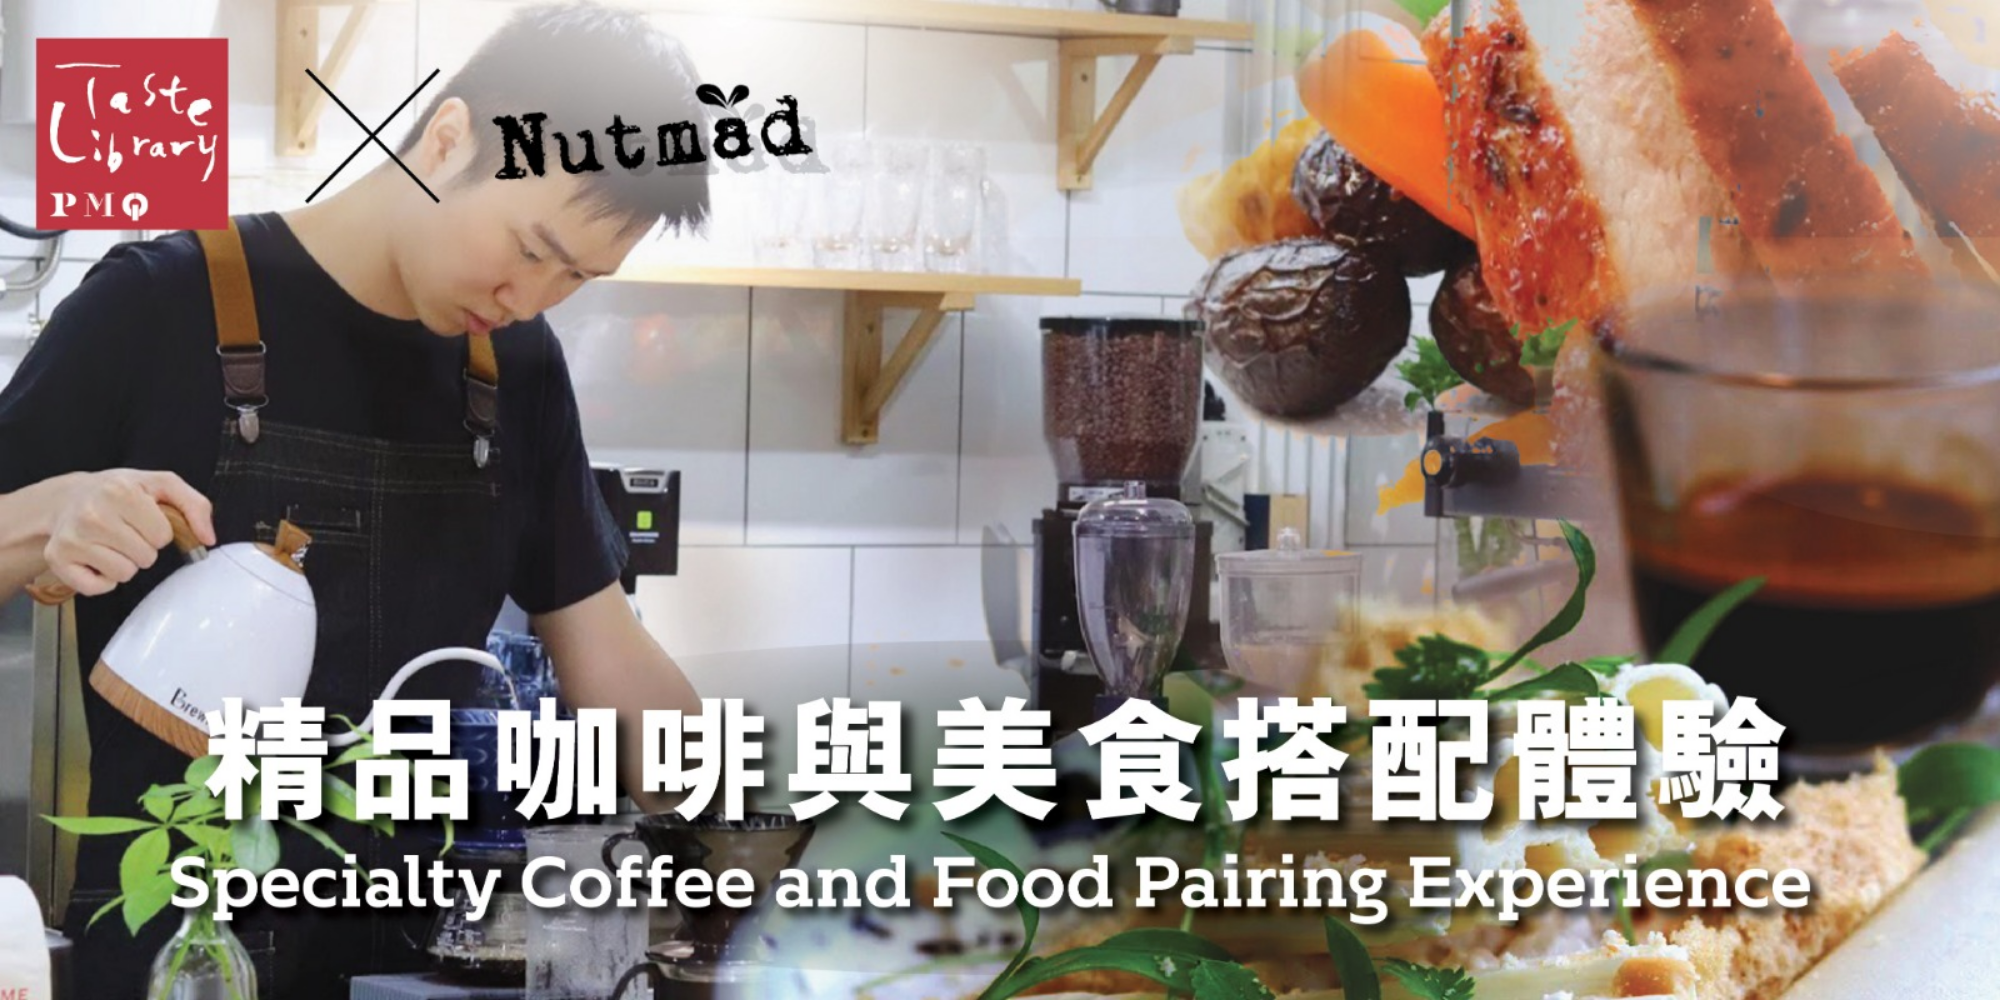 PMQ 味道圖書館 X Nutmad : 精品咖啡與美食搭配體驗 Specialty Coffee and Food Pairing Experience